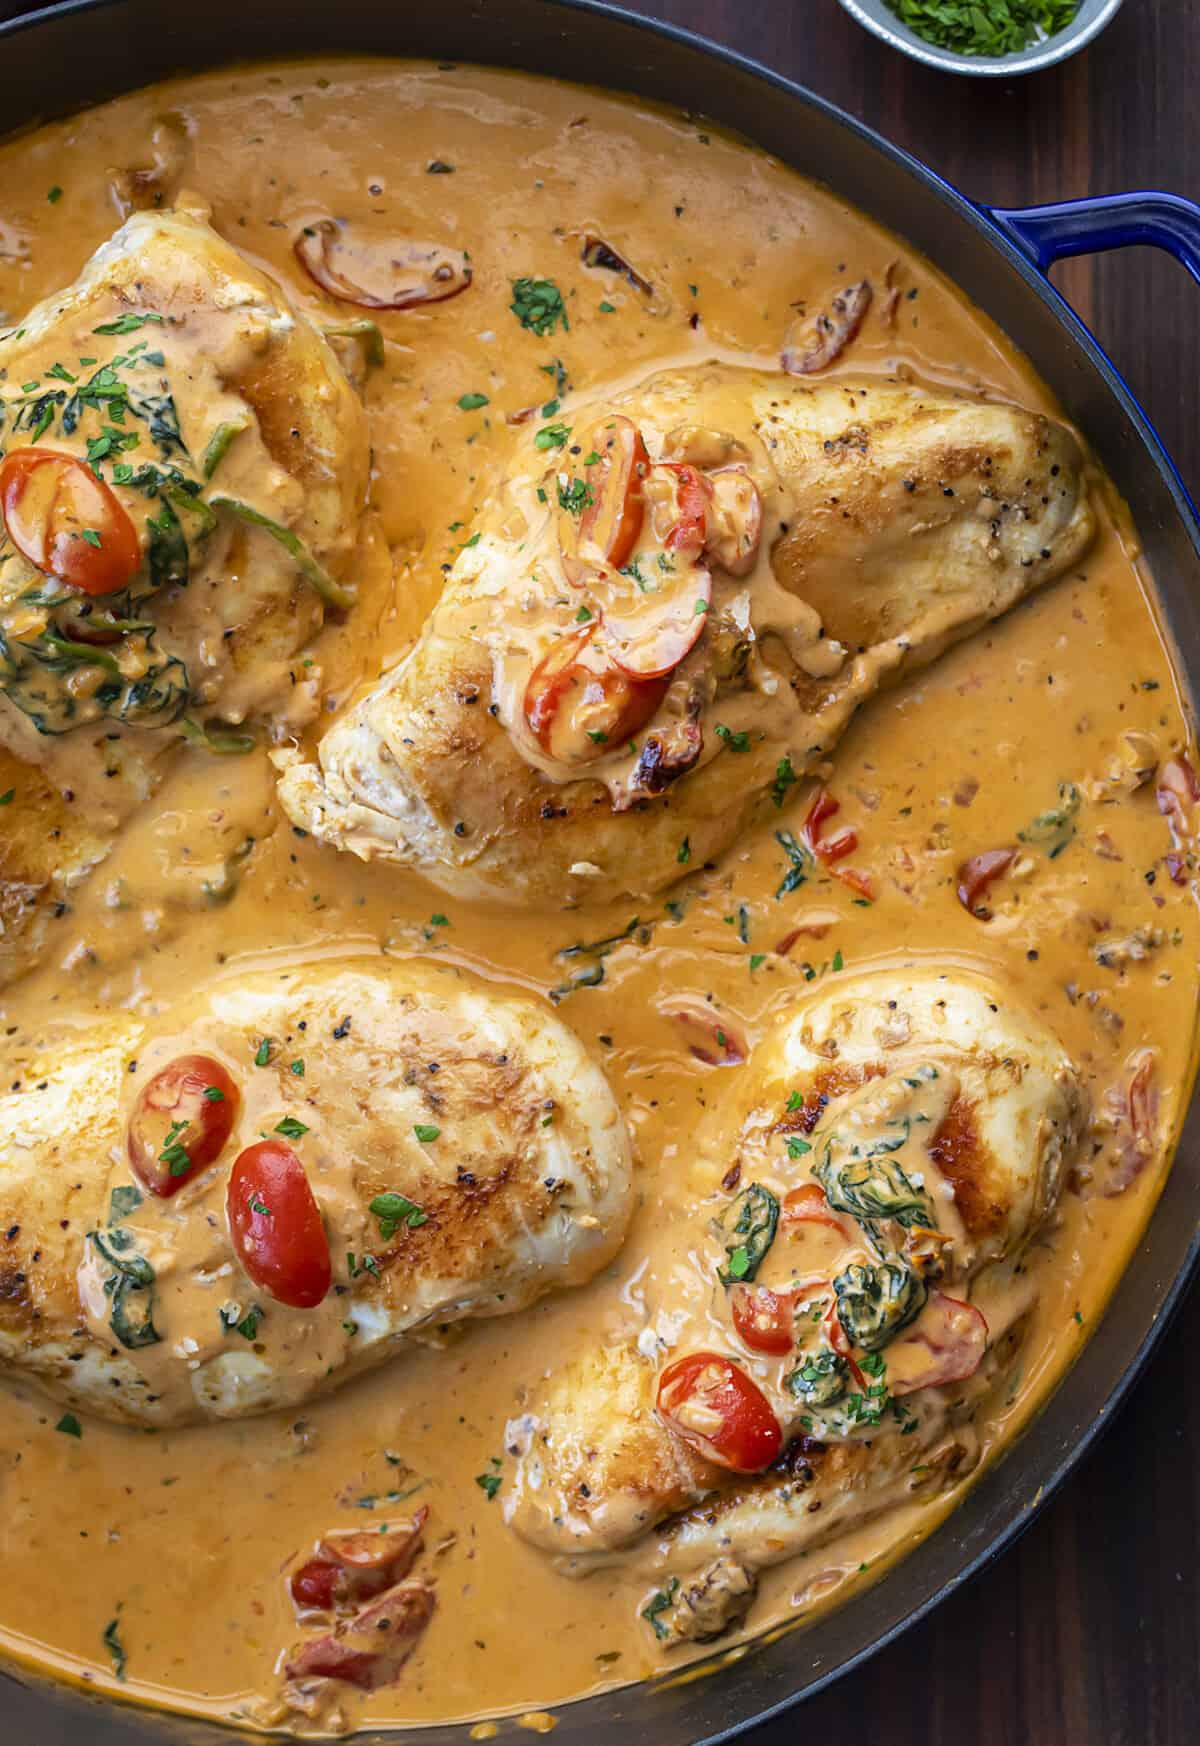 Skillet Filled with Tuscan Chicken Breasts Covered in Sauce. Dinner, Supper, Chicken Recipes, What to Cook for Dinner, Easy Chicken Recipe, How to Make Tuscan Chicken, What is Tuscan, Creamy Tomato Sauce Chicken, Kid Favorites Dinner, i am homesteader, iamhomesteader